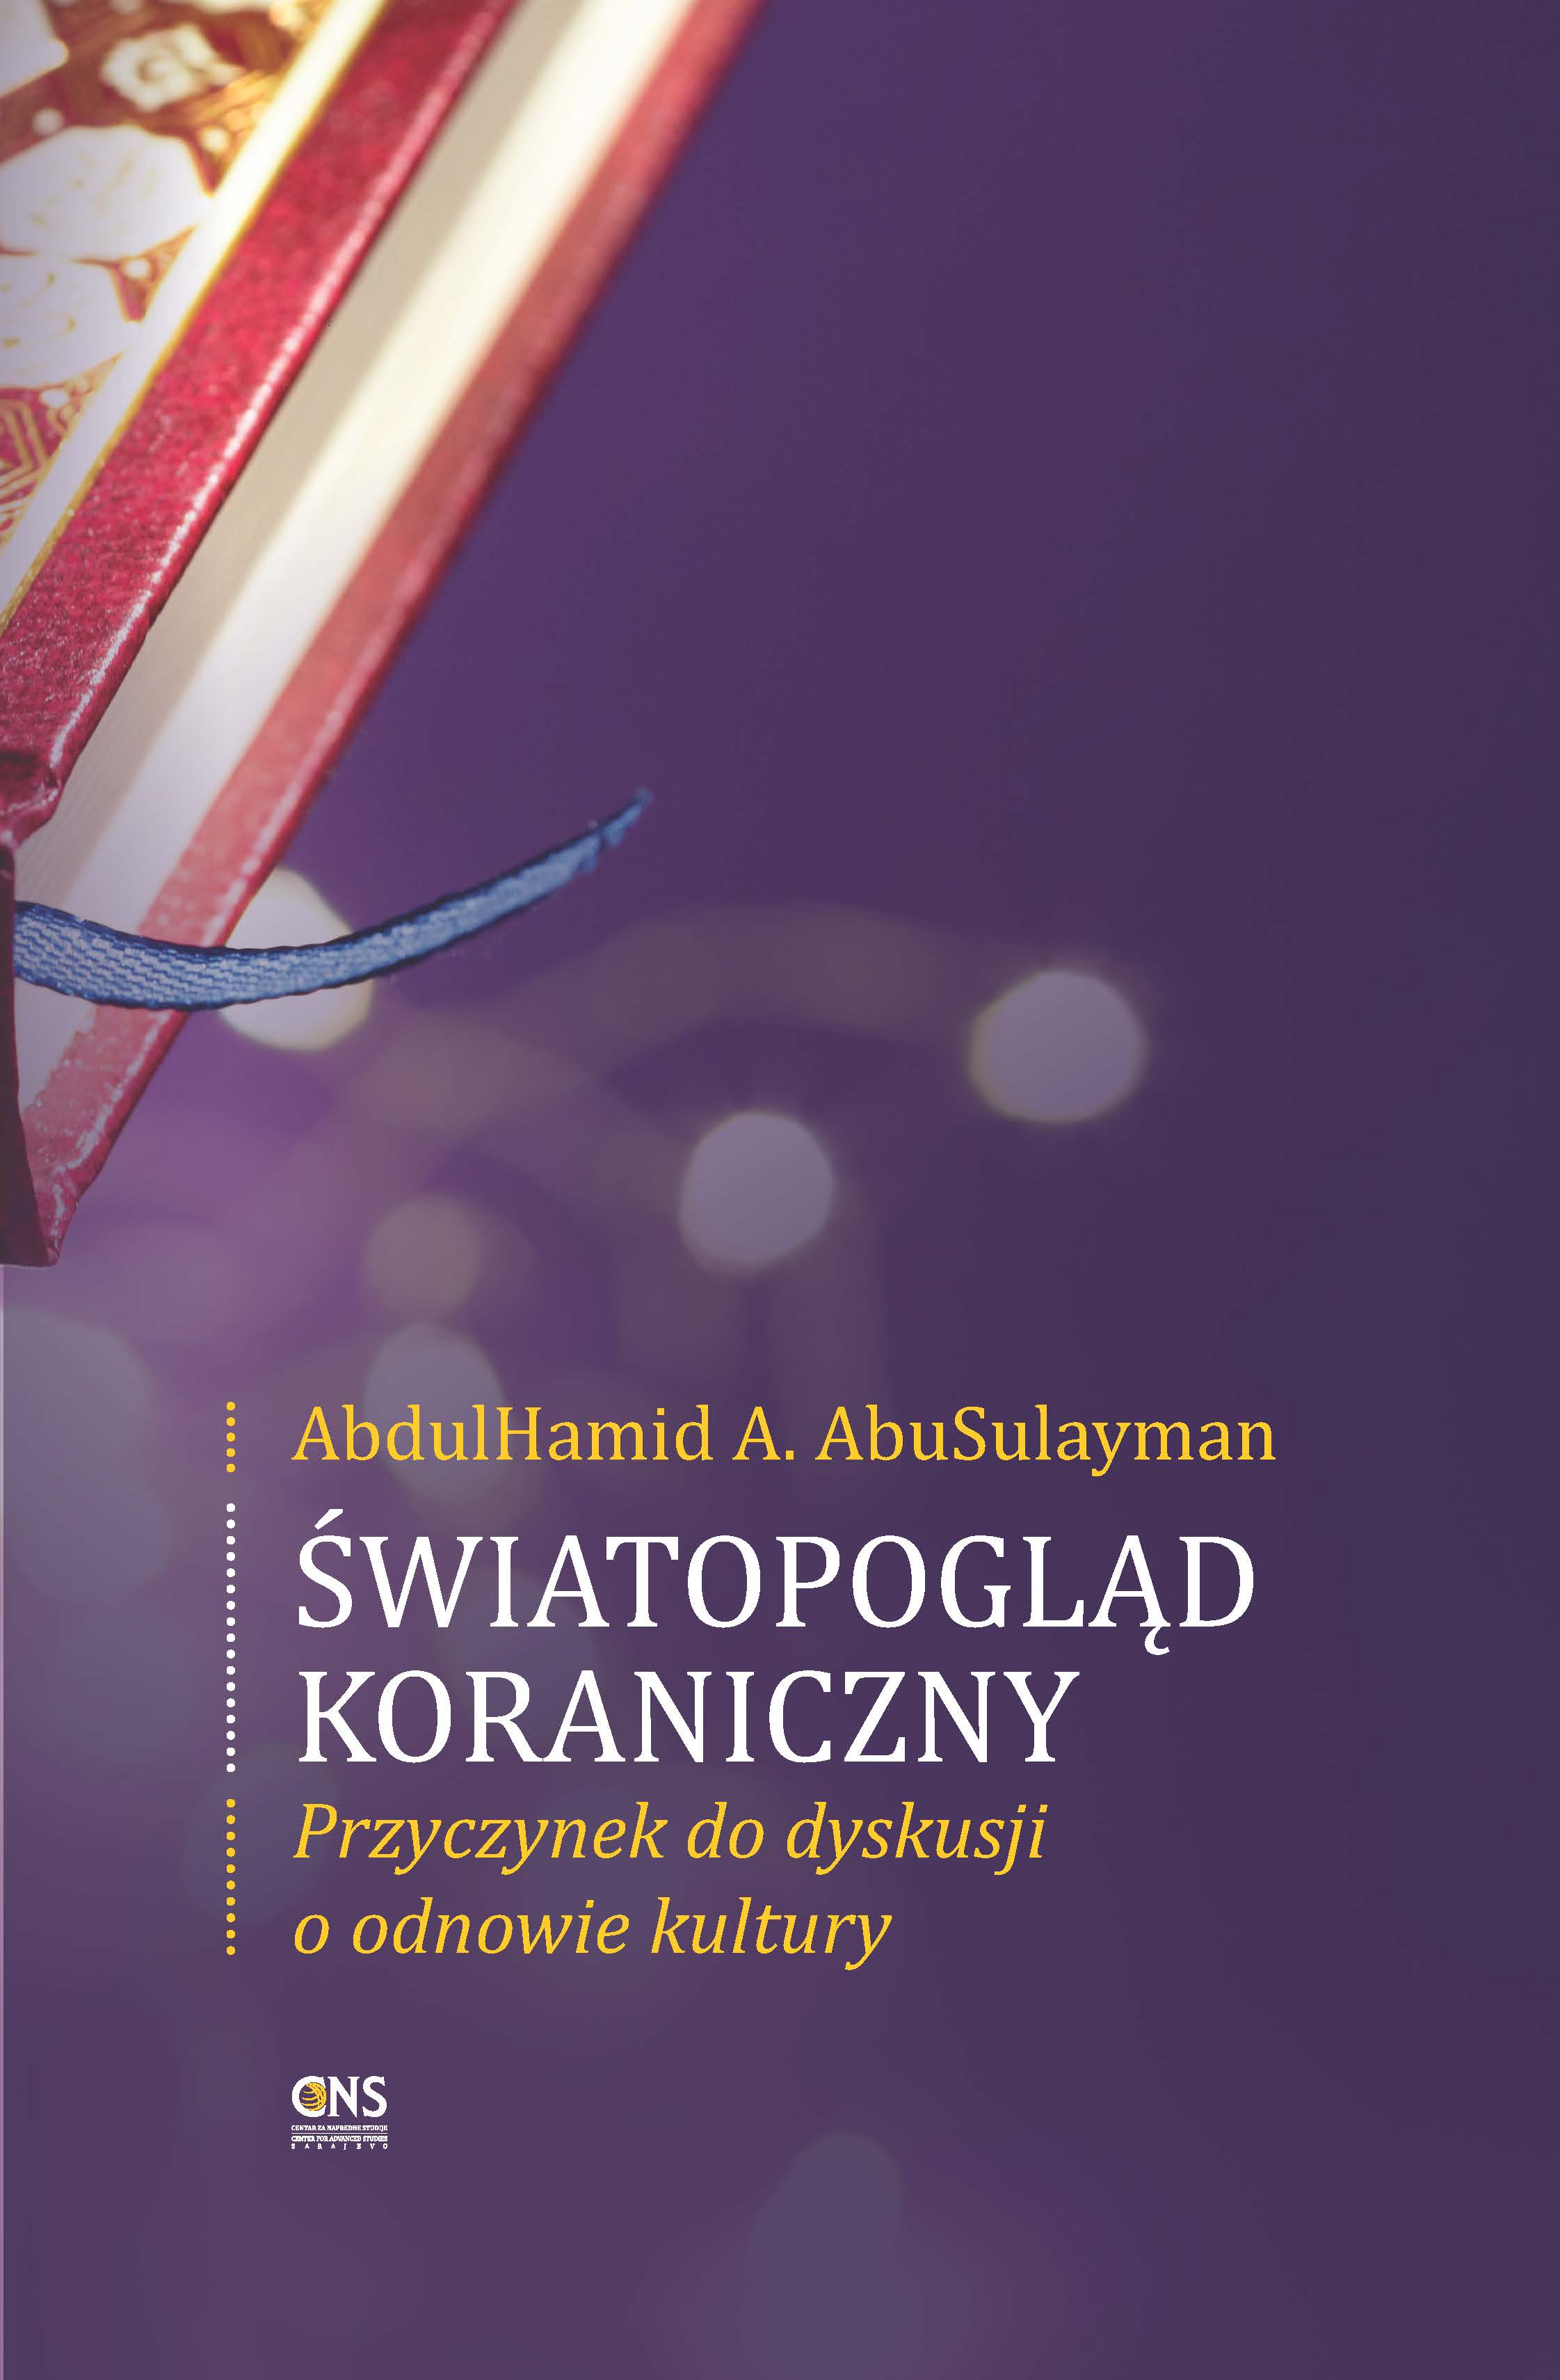 Polish : The Qur’anic Worldview: A Springboard for Cultural Reform